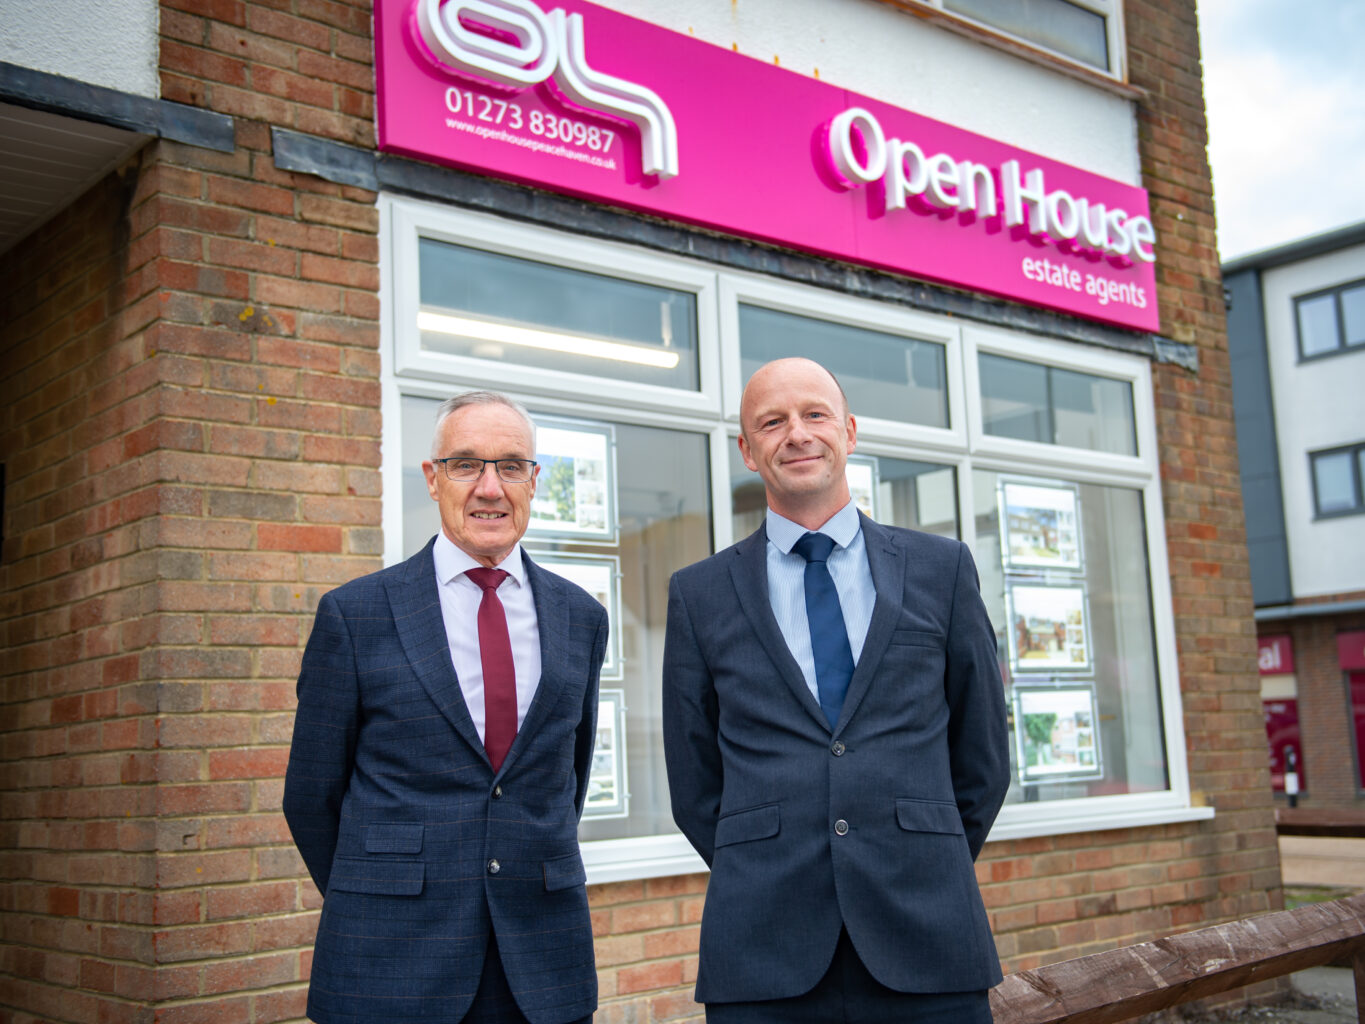 Open House Brighton Coast, your local estate agents in Peacehaven. Sell your home with Open House